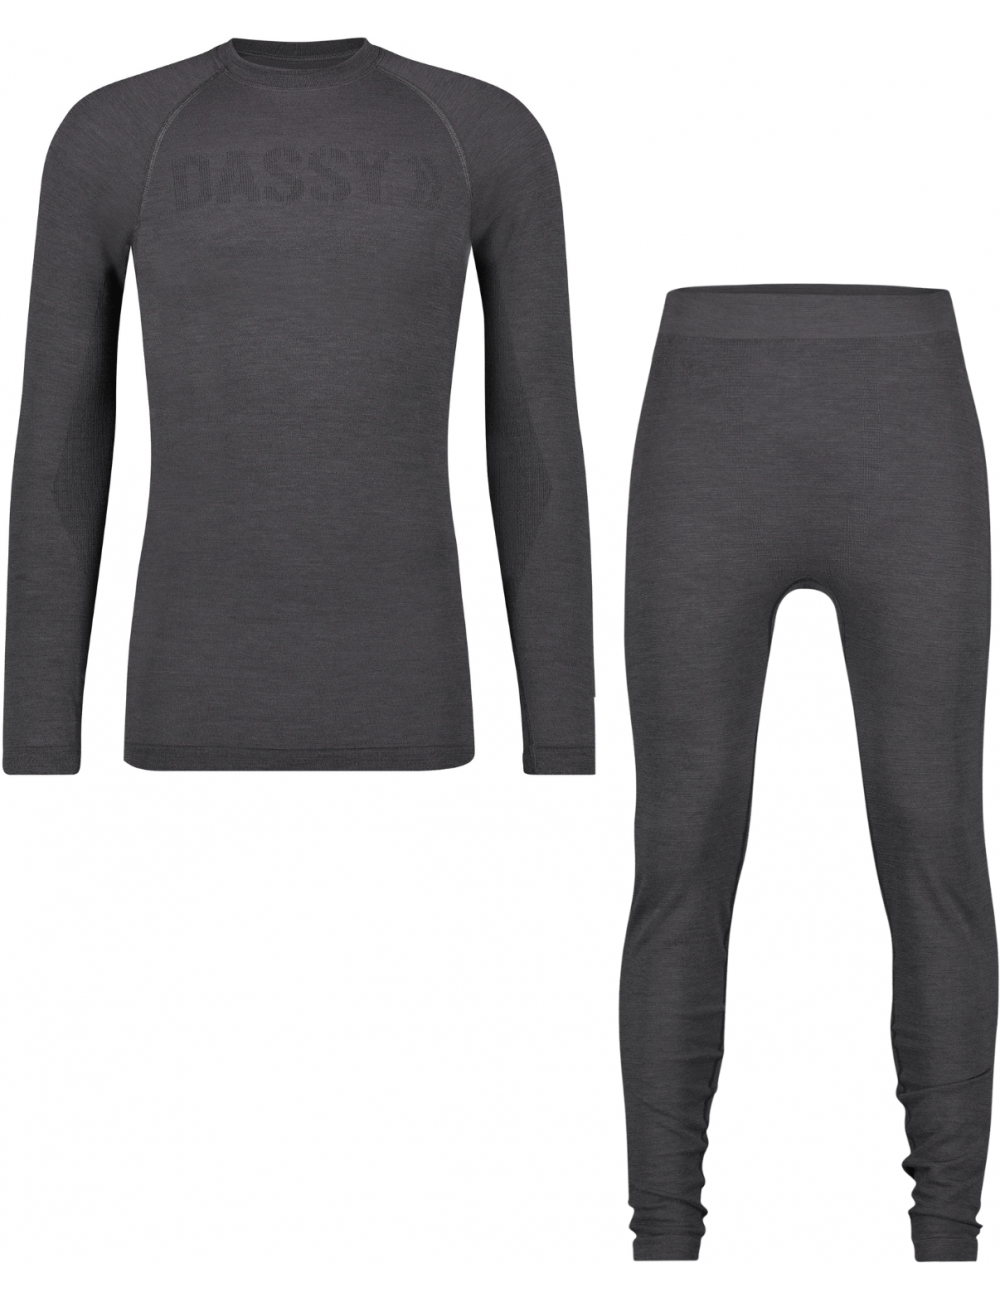 Inner Fleeces Thermal Underwear Set For Women Men Thermal Underwear Bottoms  Thermoactive Thermal Base Layer With Tops Trouser